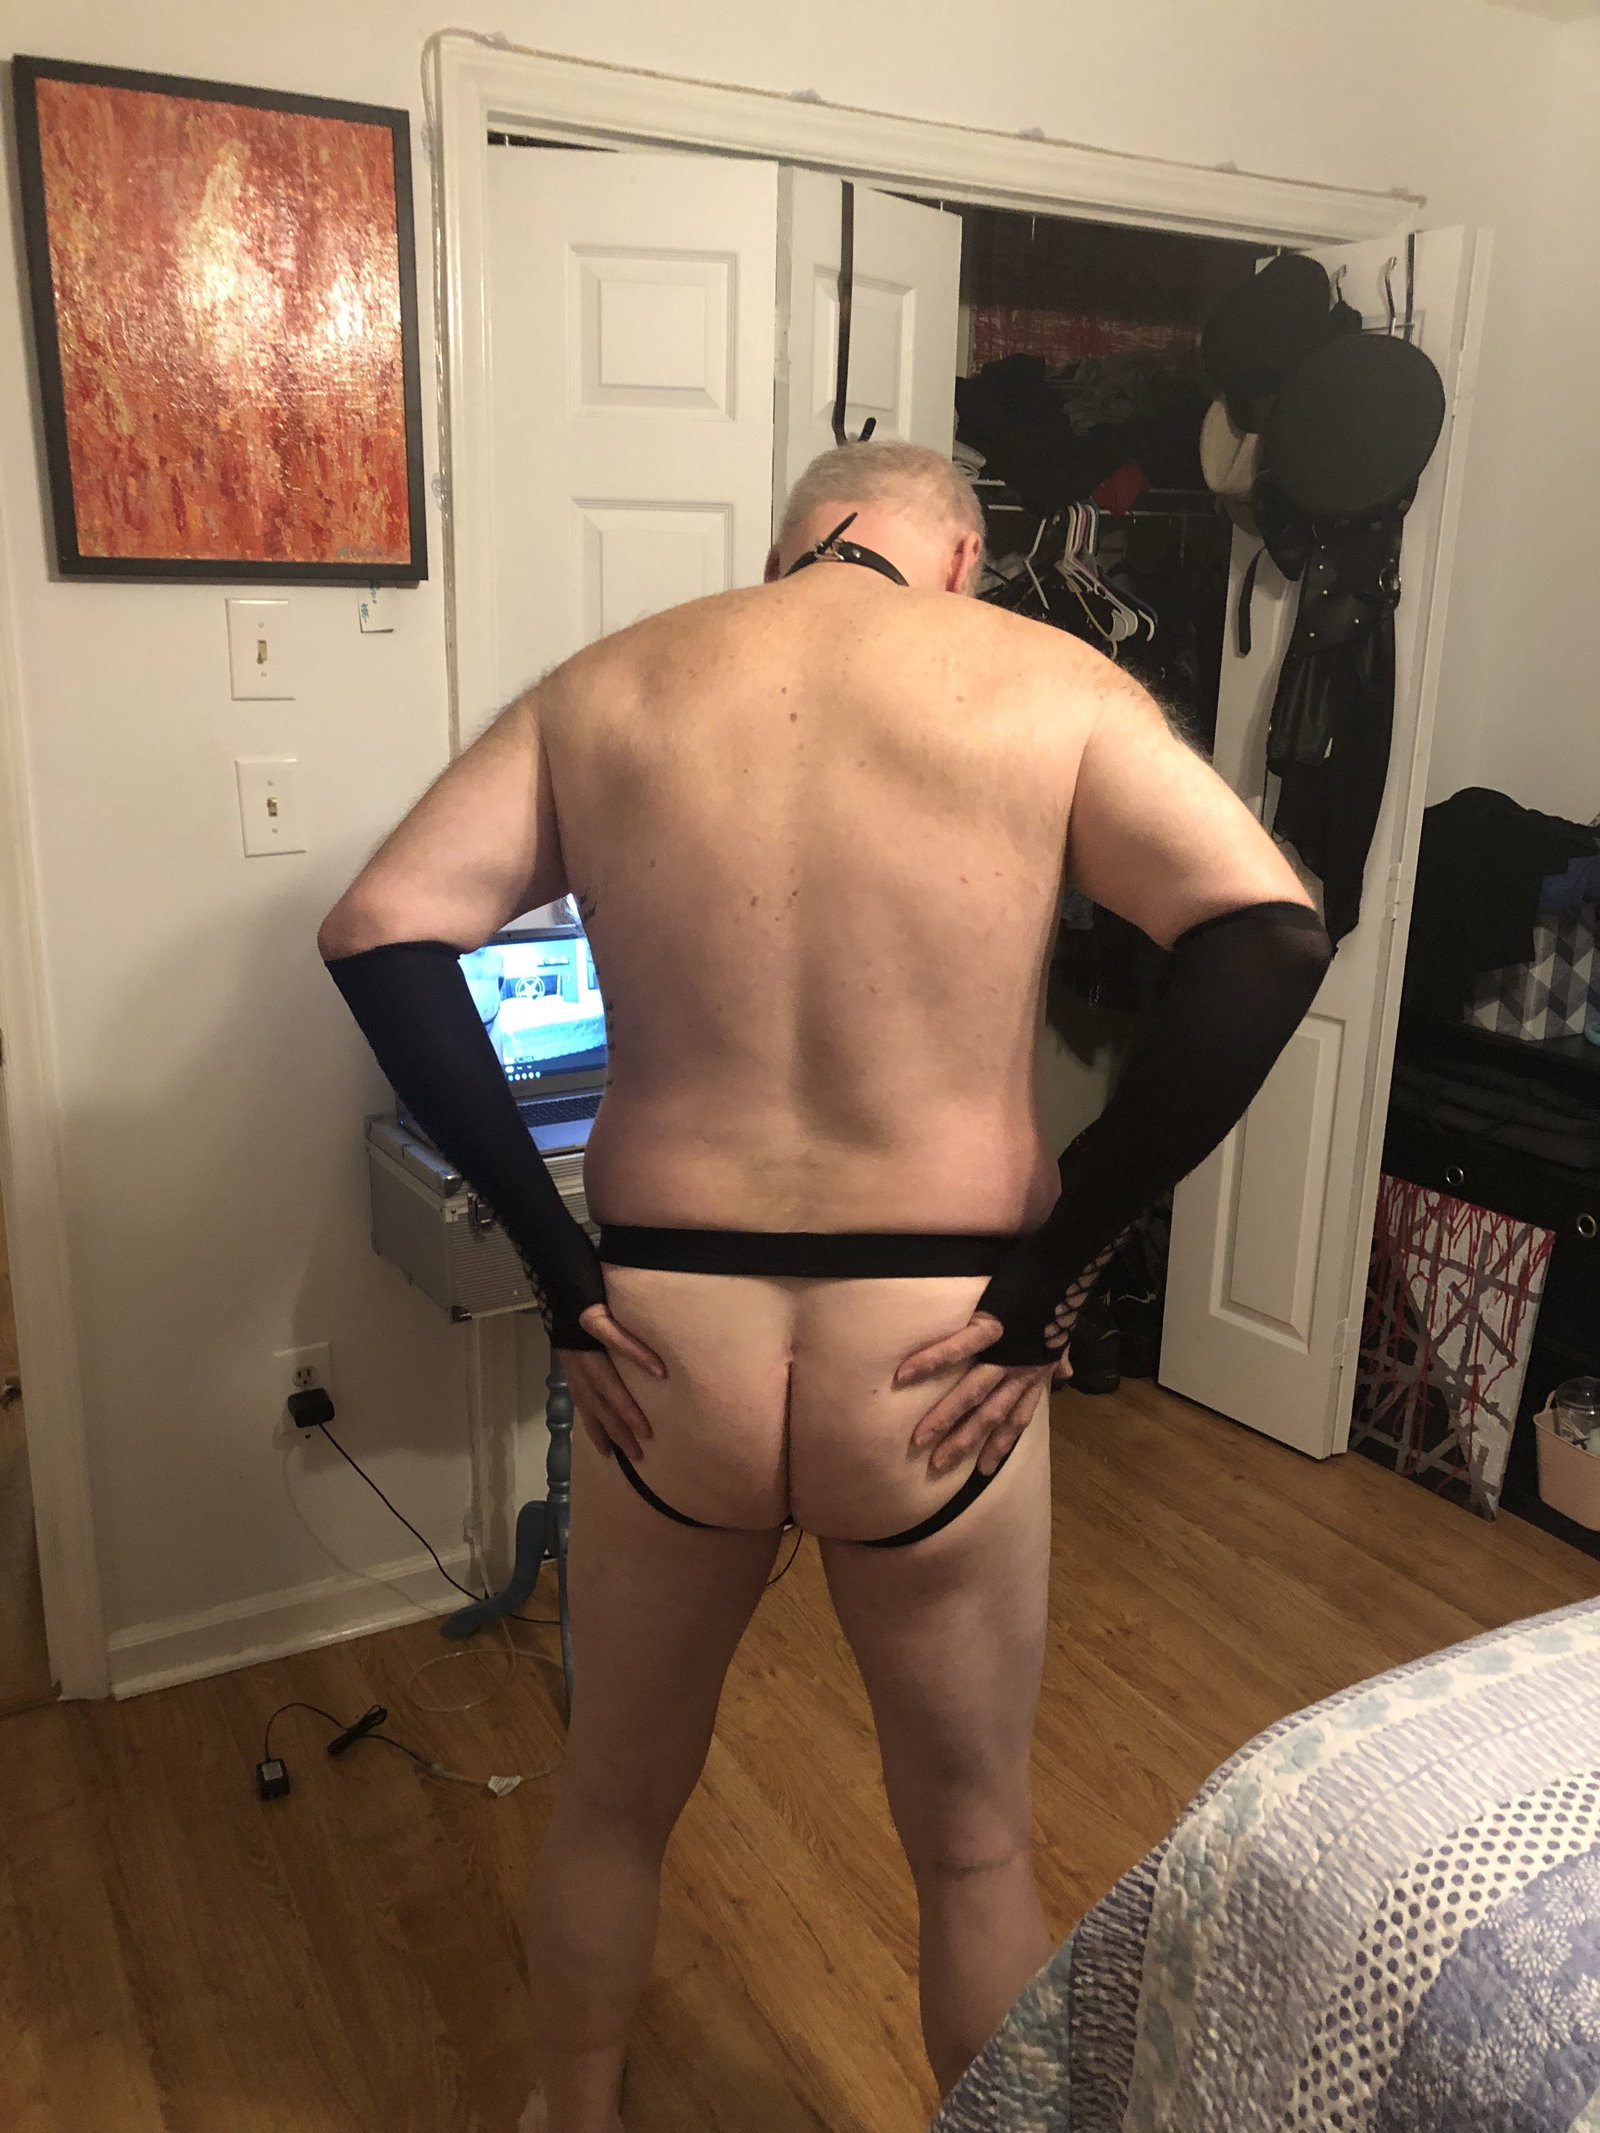 Photo by Dxbx369 with the username @Dxbx369, who is a verified user,  February 1, 2024 at 9:41 AM. The post is about the topic Sleazy Gay Pigs and the text says '369hellpigs.com

#gay #ass #pigs #pervers'